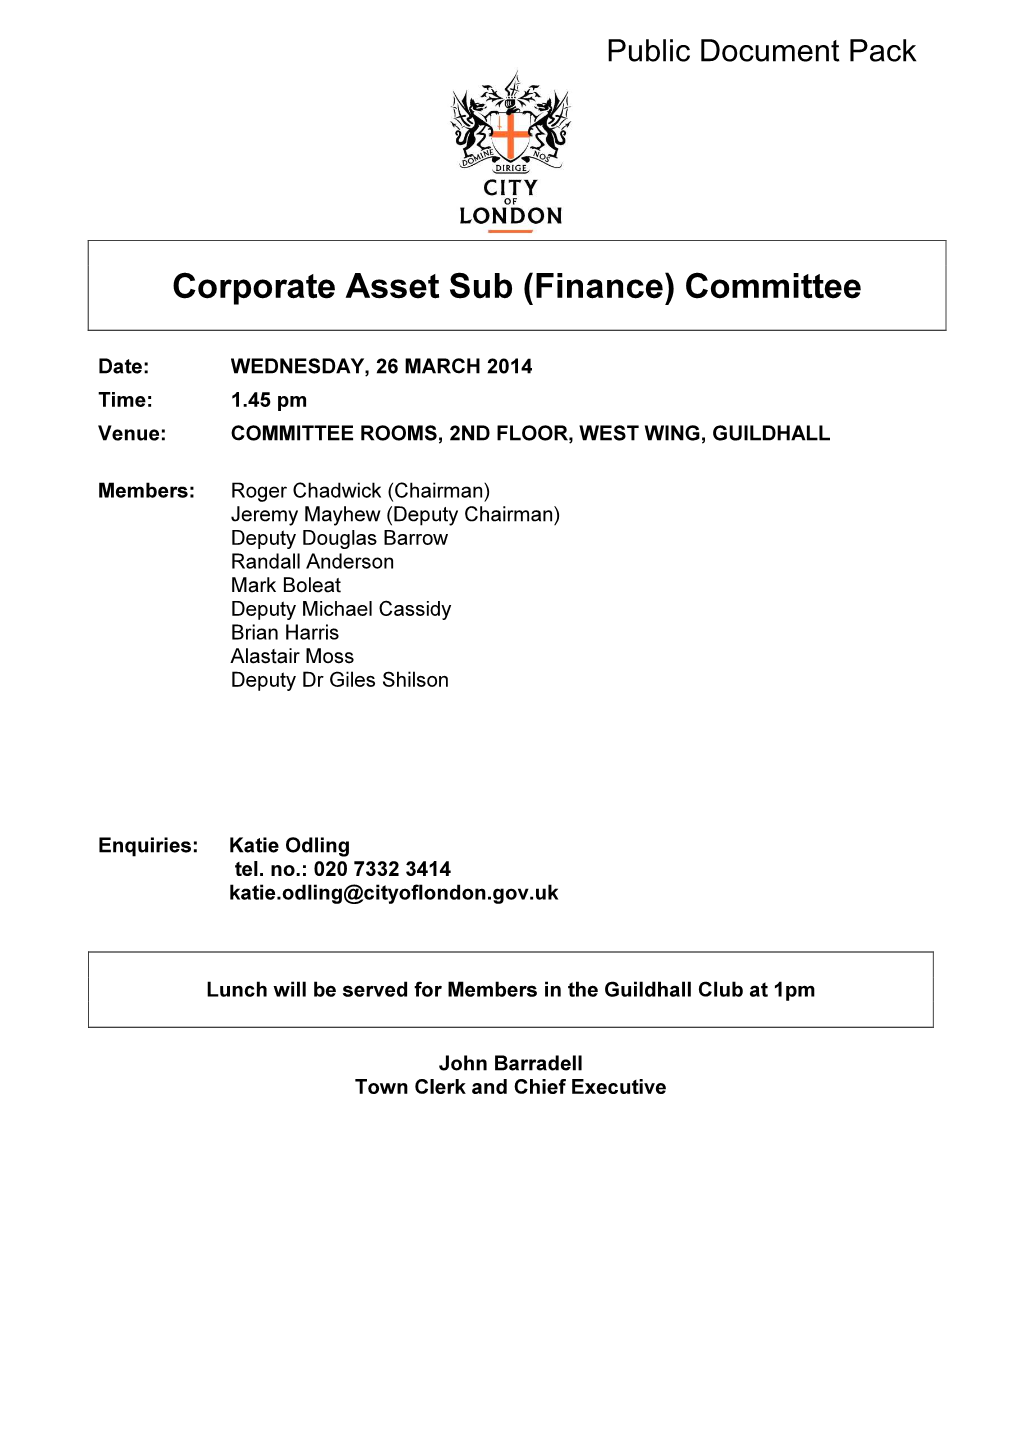 Corporate Asset Sub (Finance) Committee